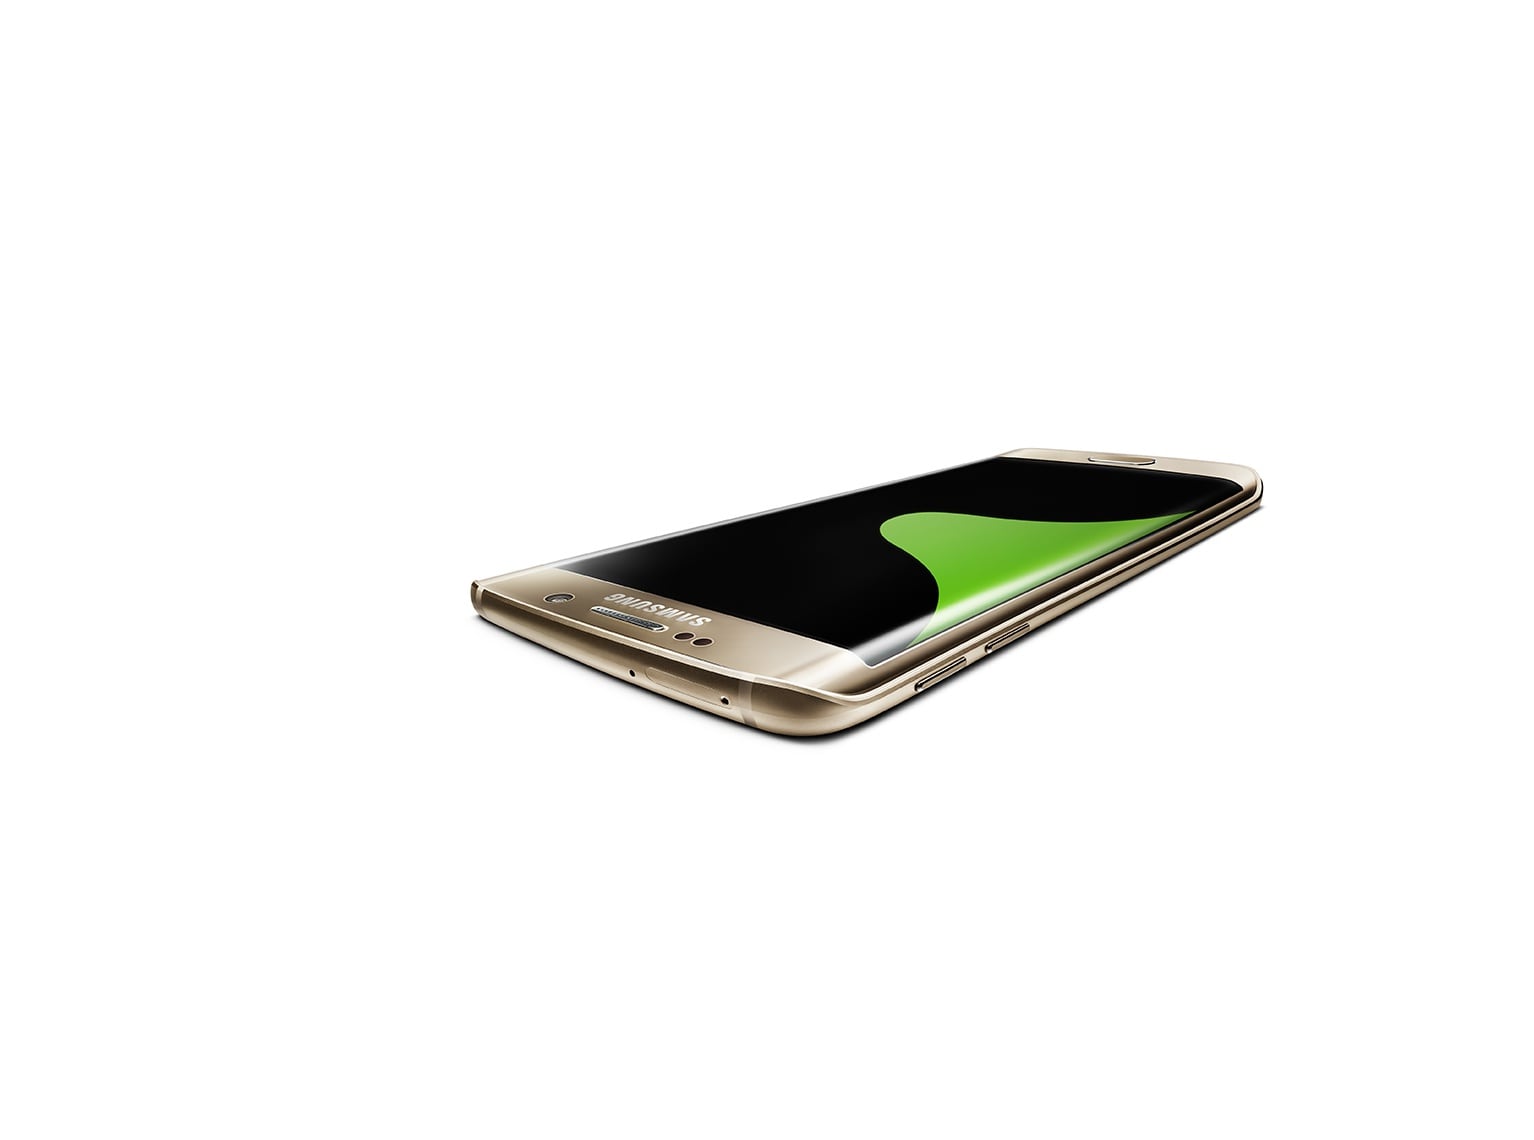 Gold Platinum Galaxy S6 Edge Plus Lying Face Up - Smartphone , HD Wallpaper & Backgrounds